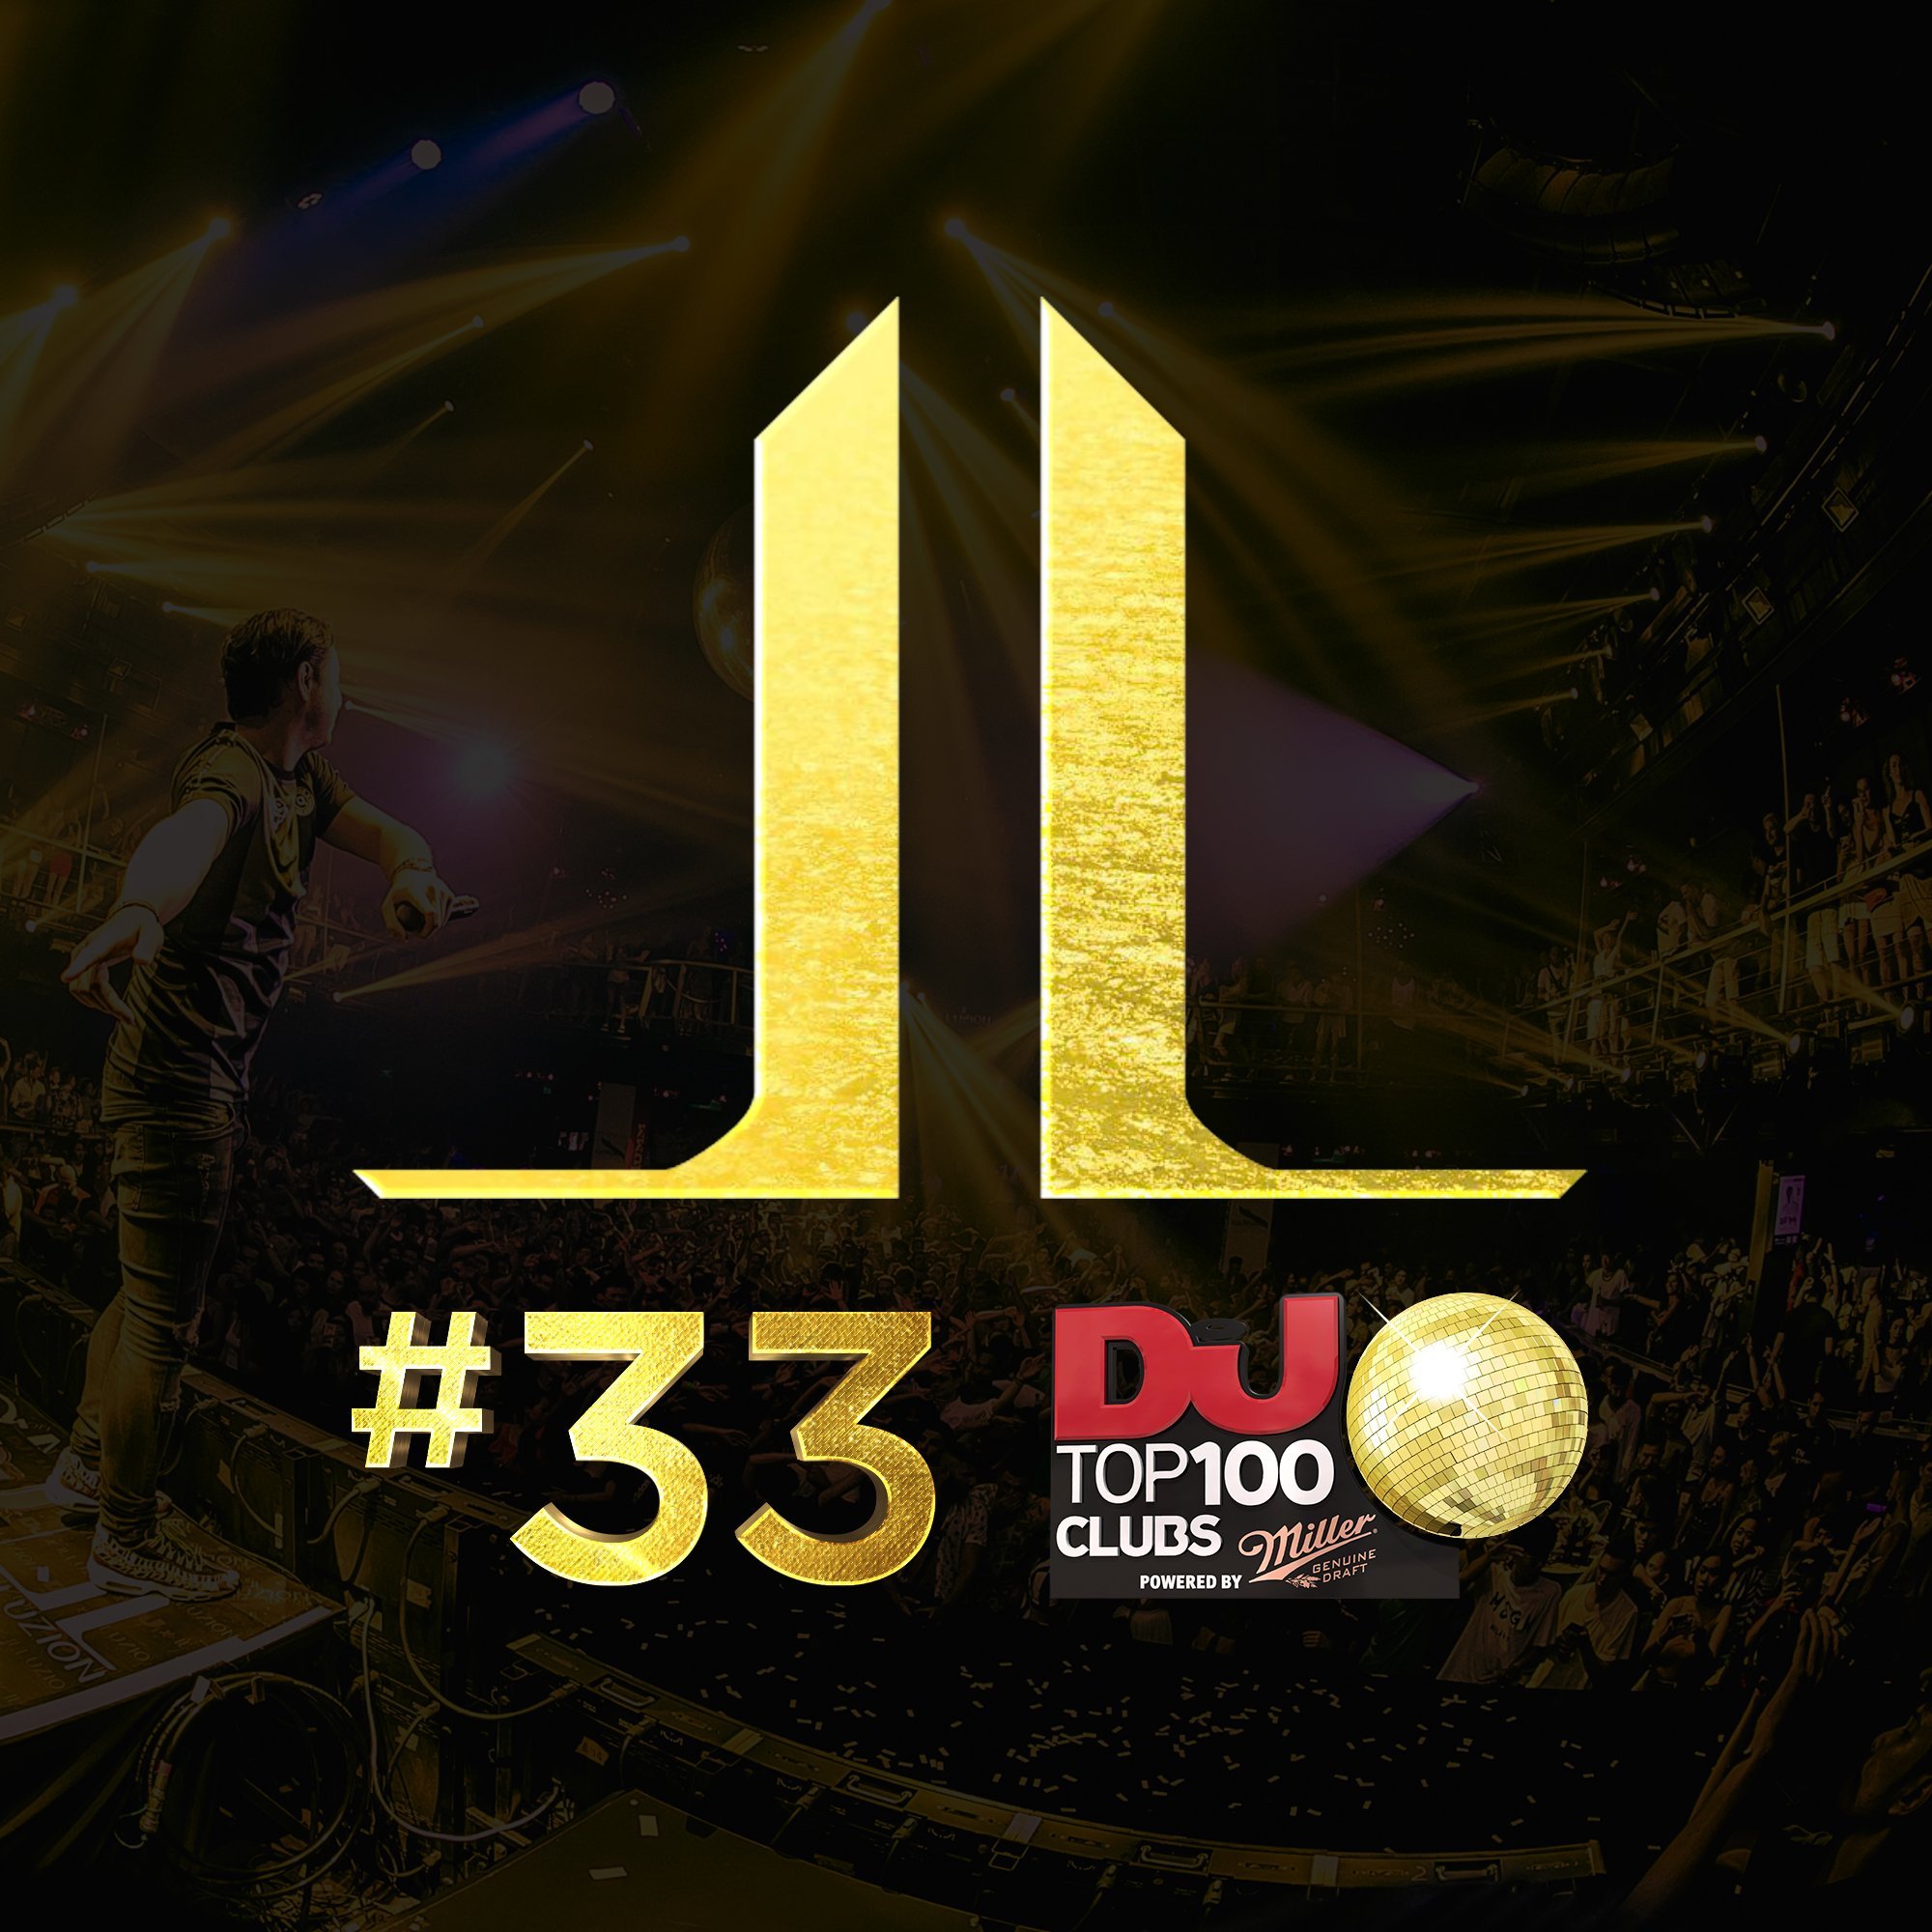 33 WORLD's TOP 100 CLUBS by DJ Mag The Ultimate Clubbing Experience in Thailand rsvn@illuzionphuket.com FB: Illuzion Phuket